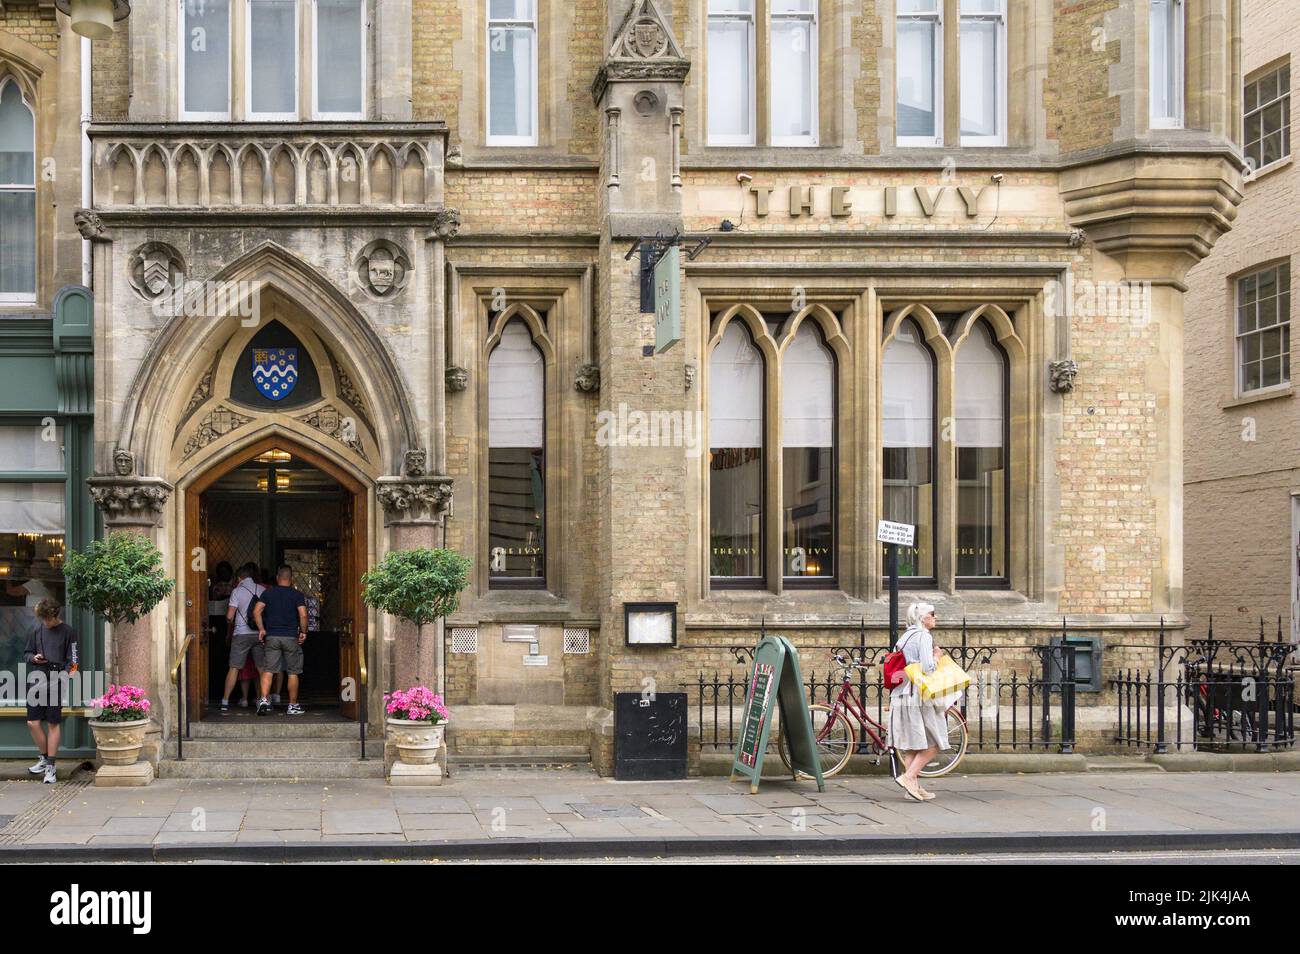 Exterior of The Ivy Brasserie restaurant with people walking past, Oxford, UK Stock Photo